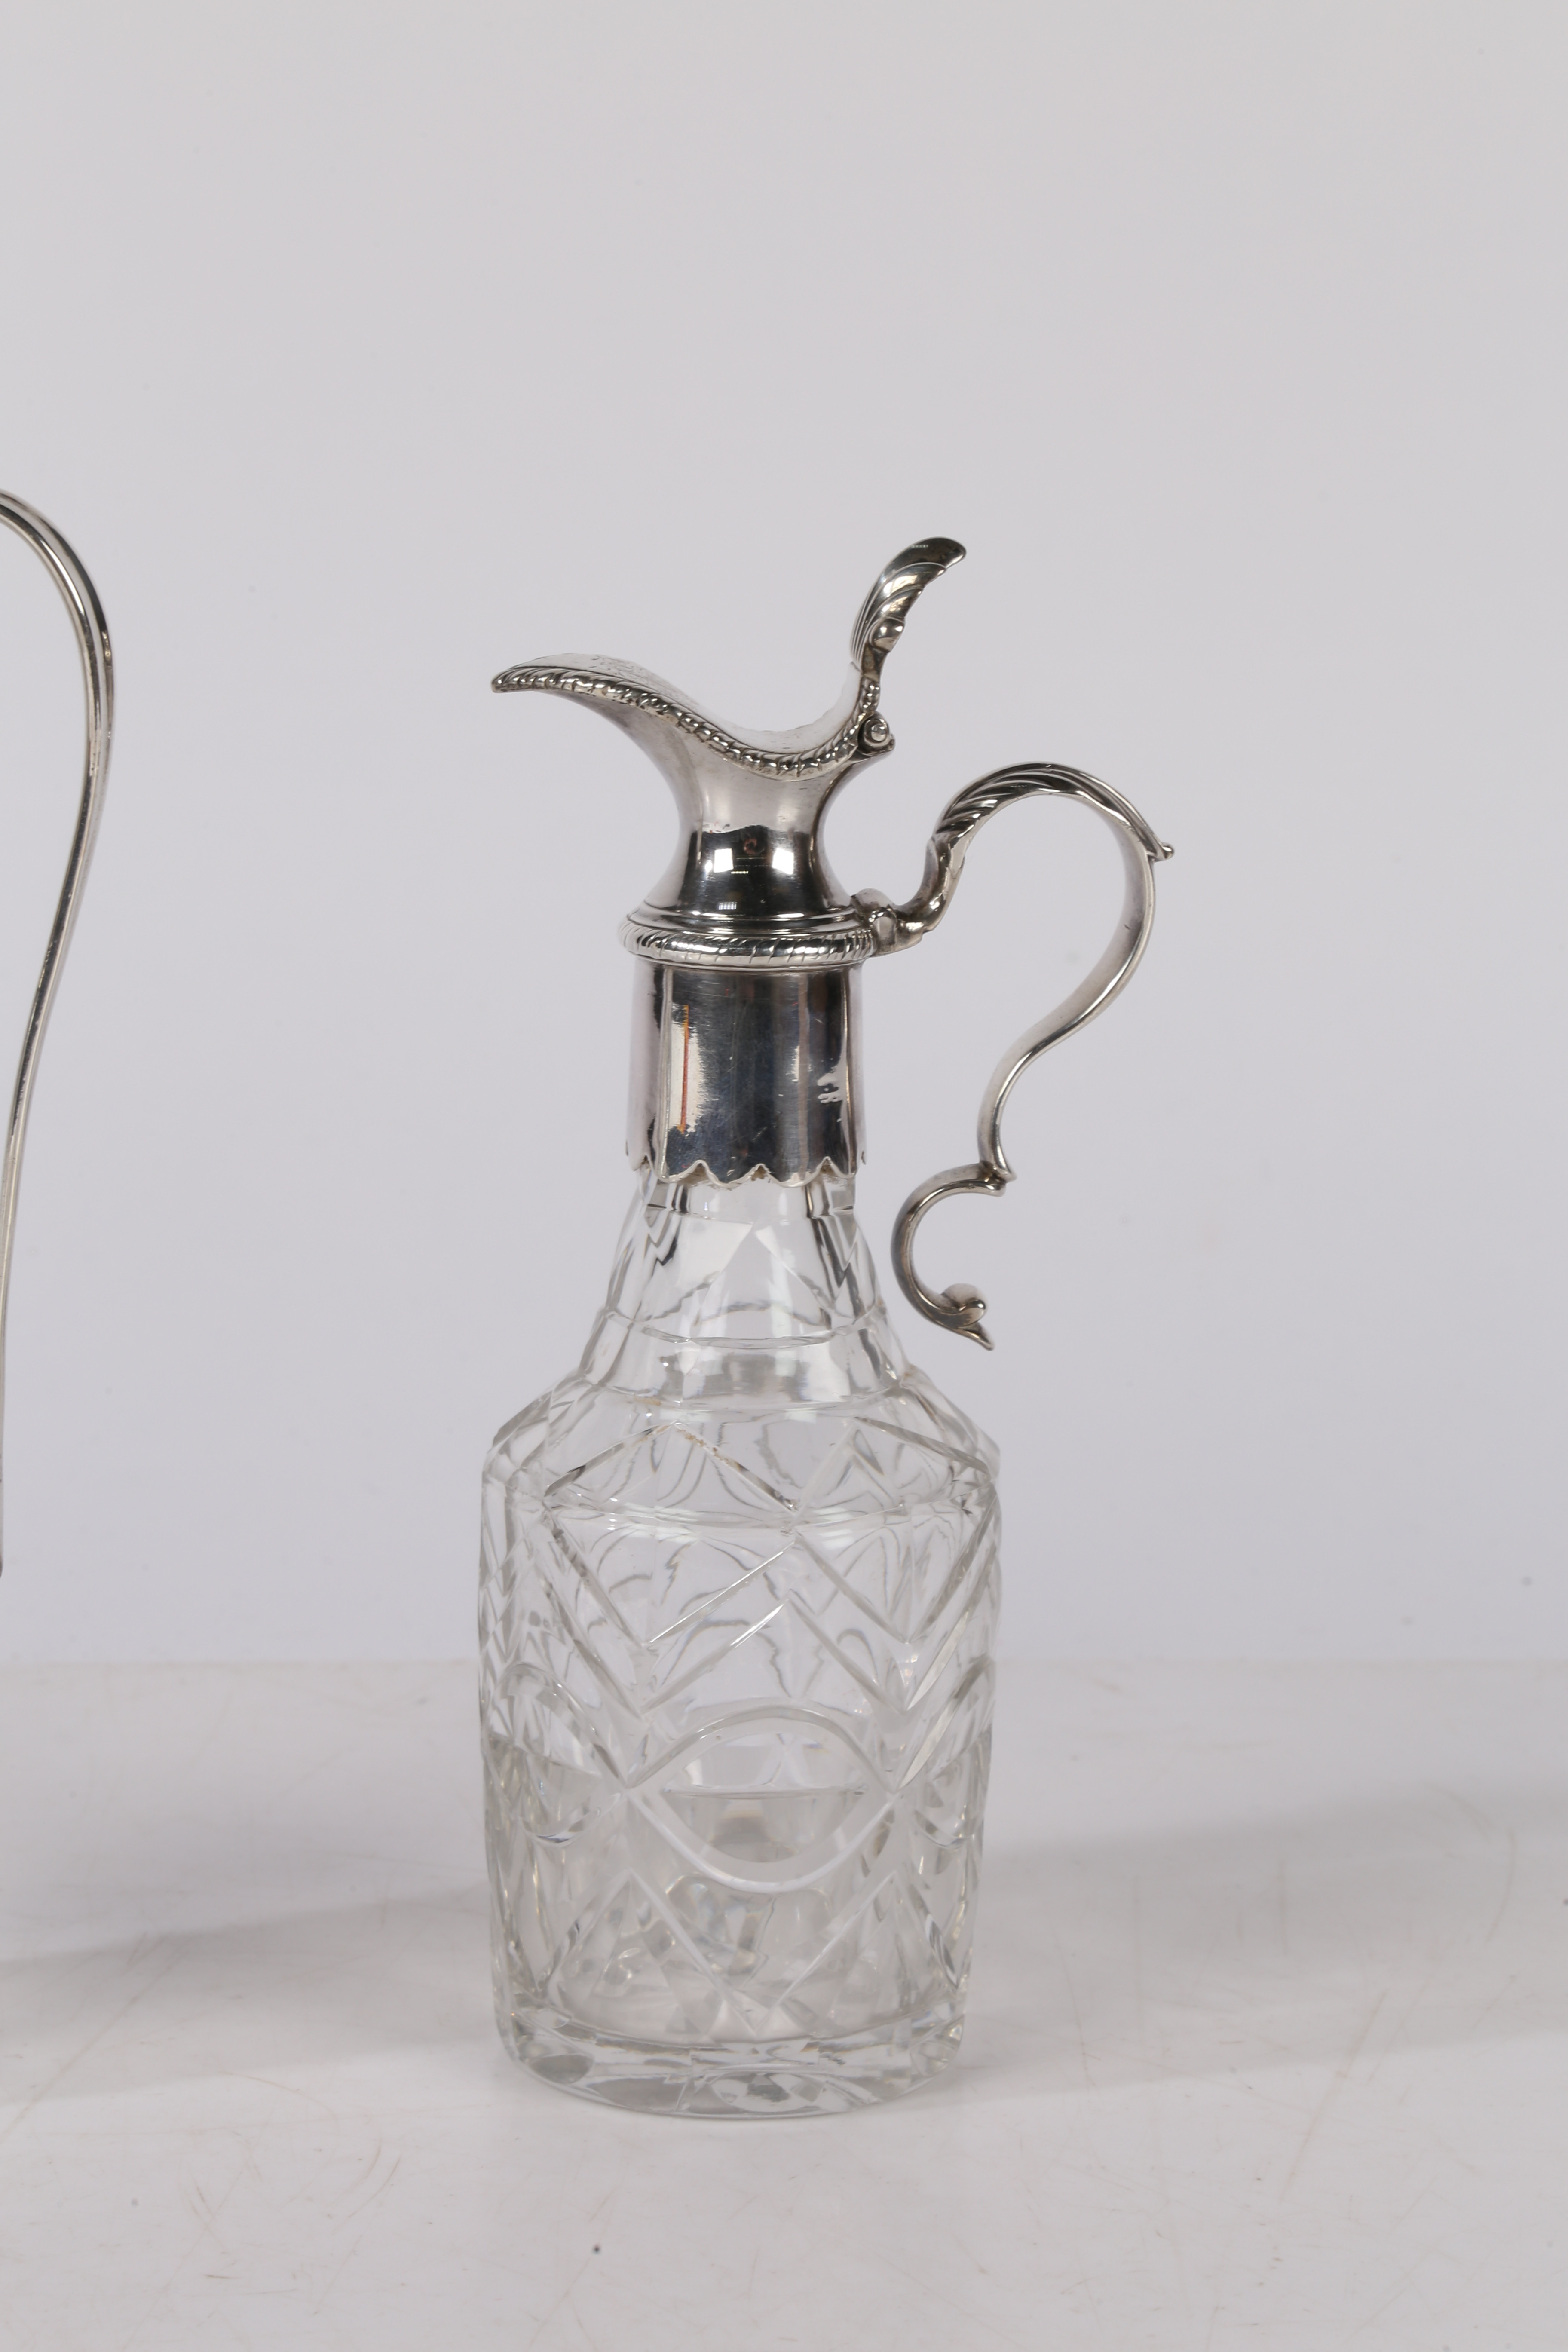 TWO EARLY 19TH CENTURY SILVER MOUNTED CRUET BOTTLES. - Image 3 of 8